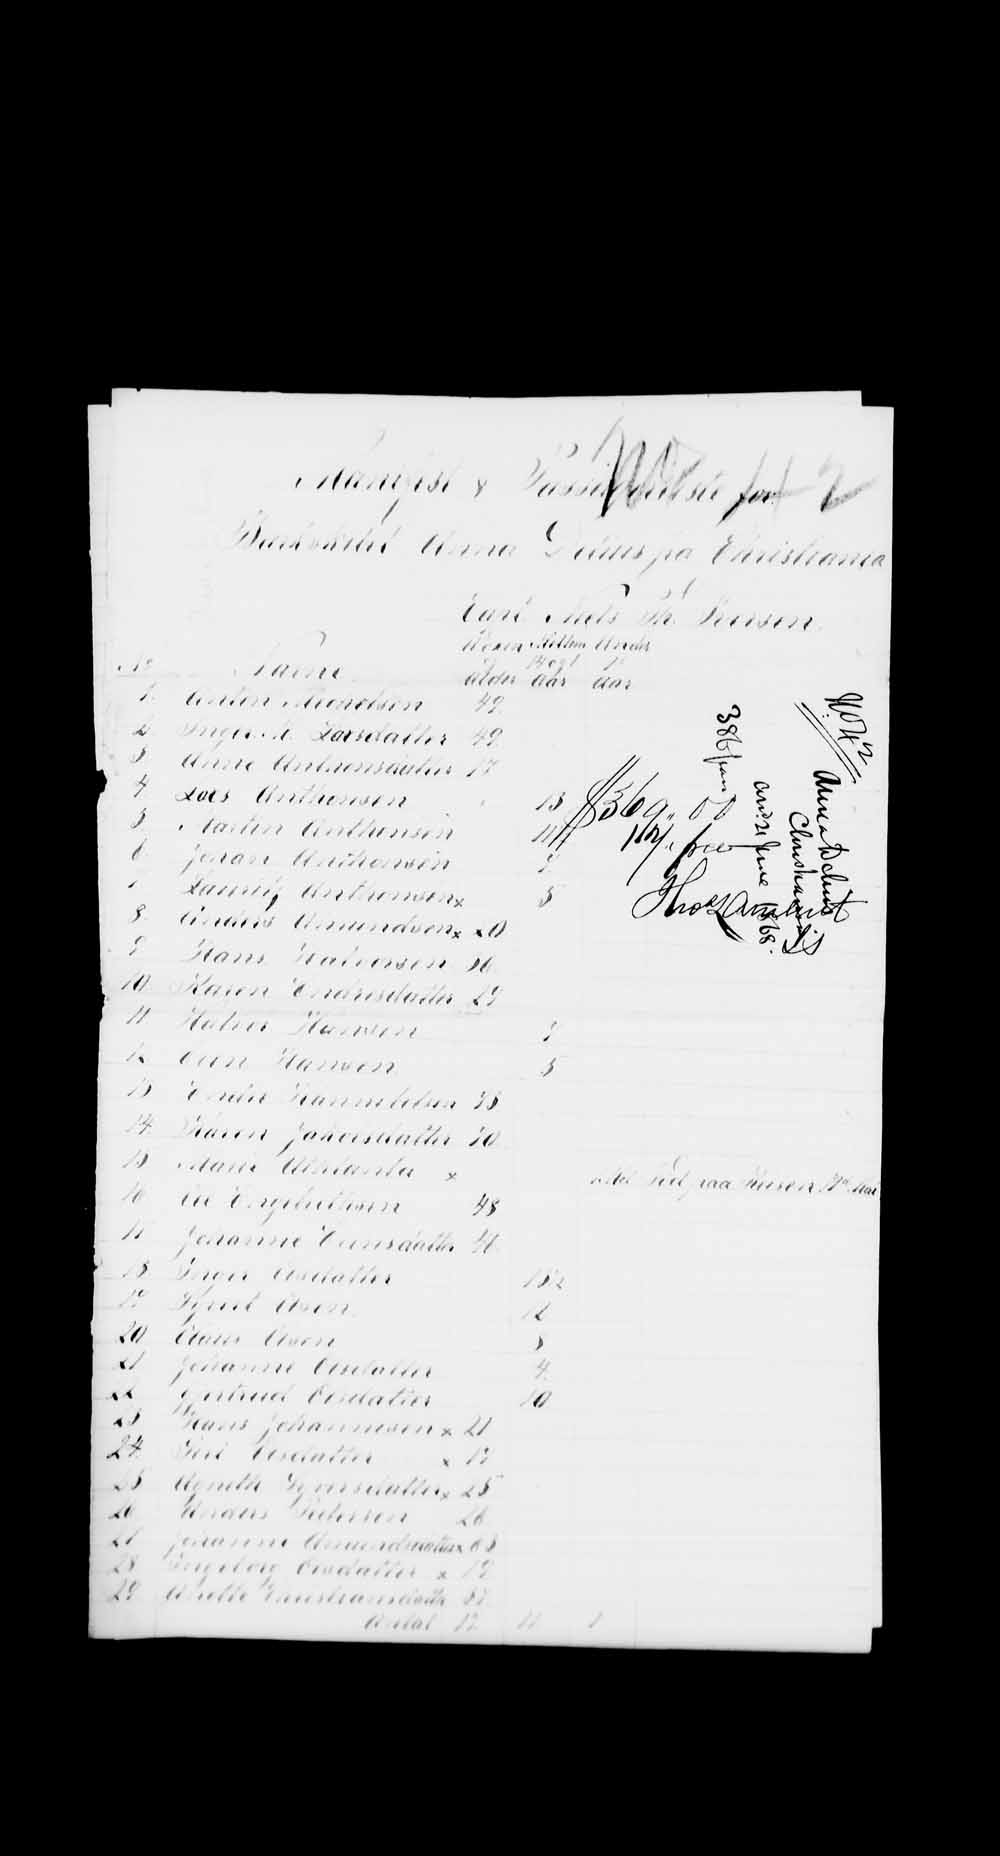 Digitized page of Passenger Lists for Image No.: e003530334